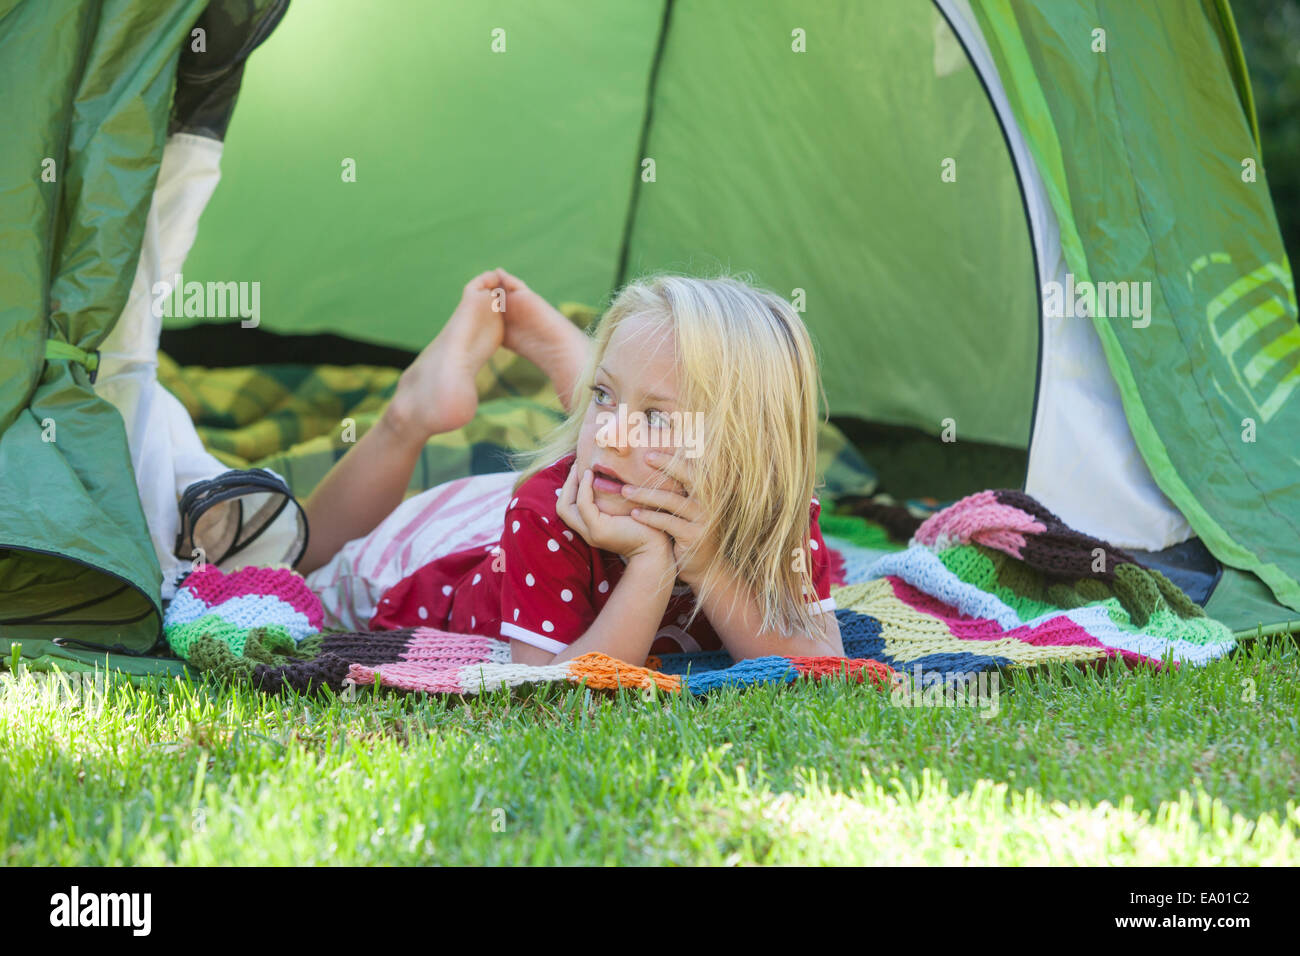 Portrait of girl daydreaming in garden tent Stock Photo